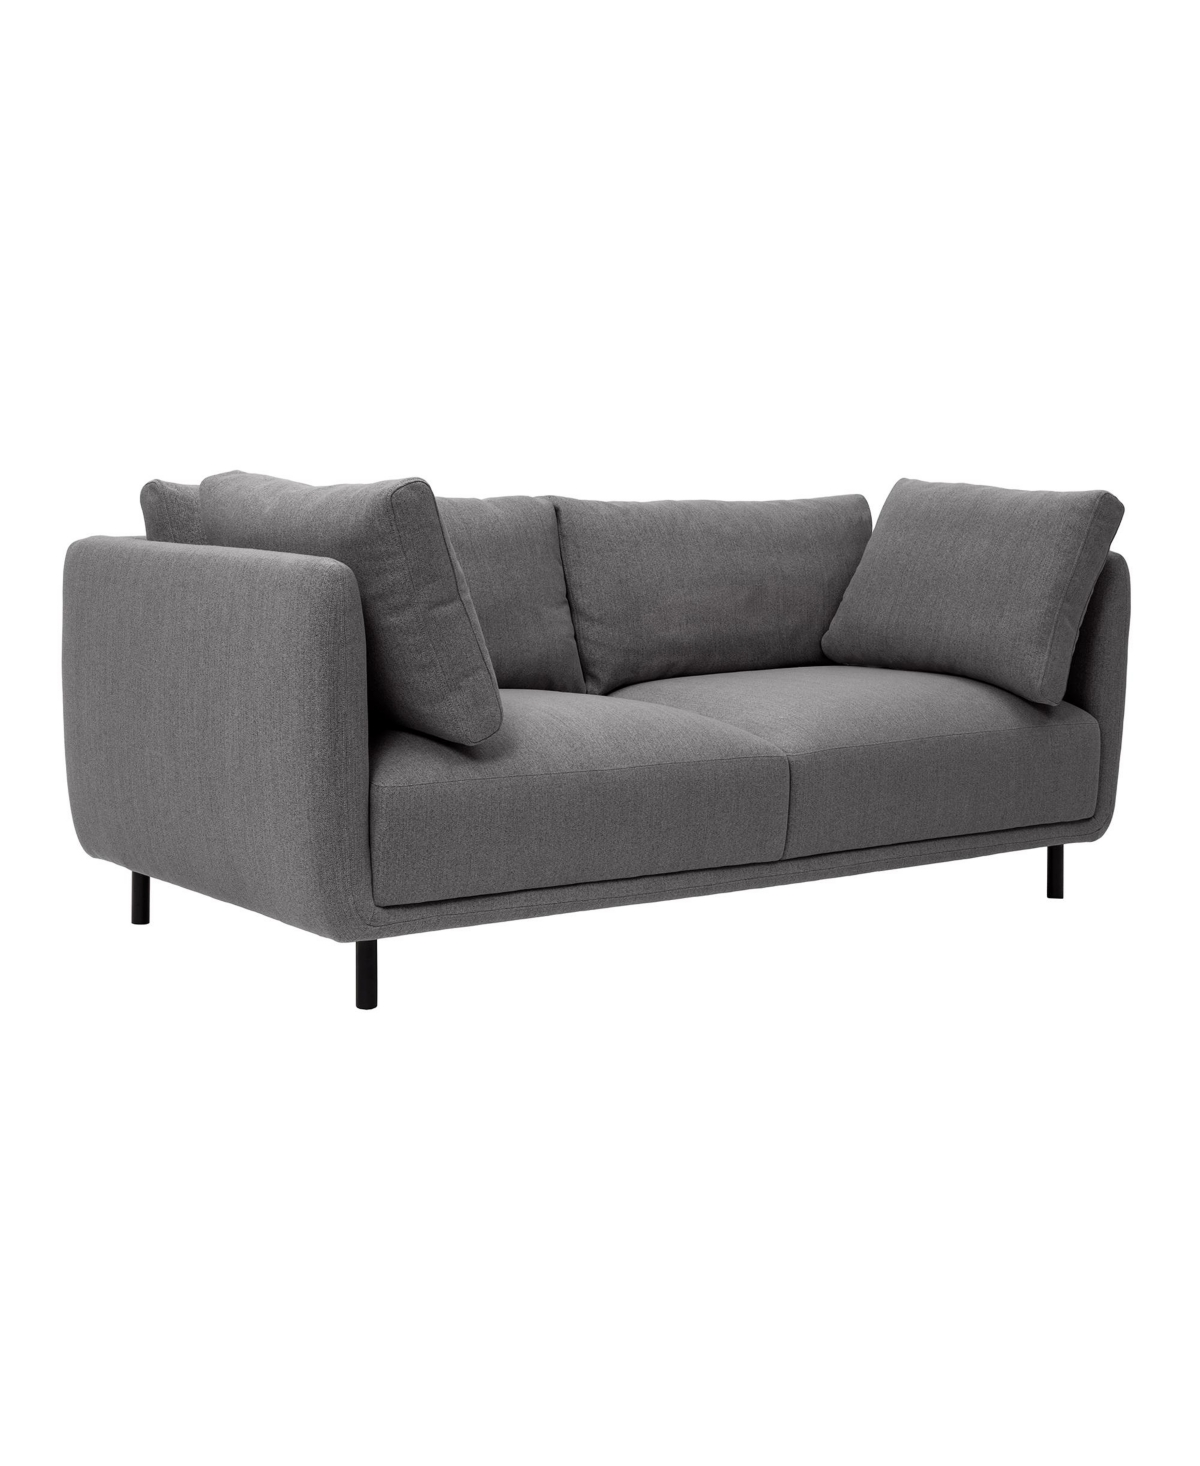 Armen Living Serenity 79" Polyester With Metal Legs Sofa In Gray,black